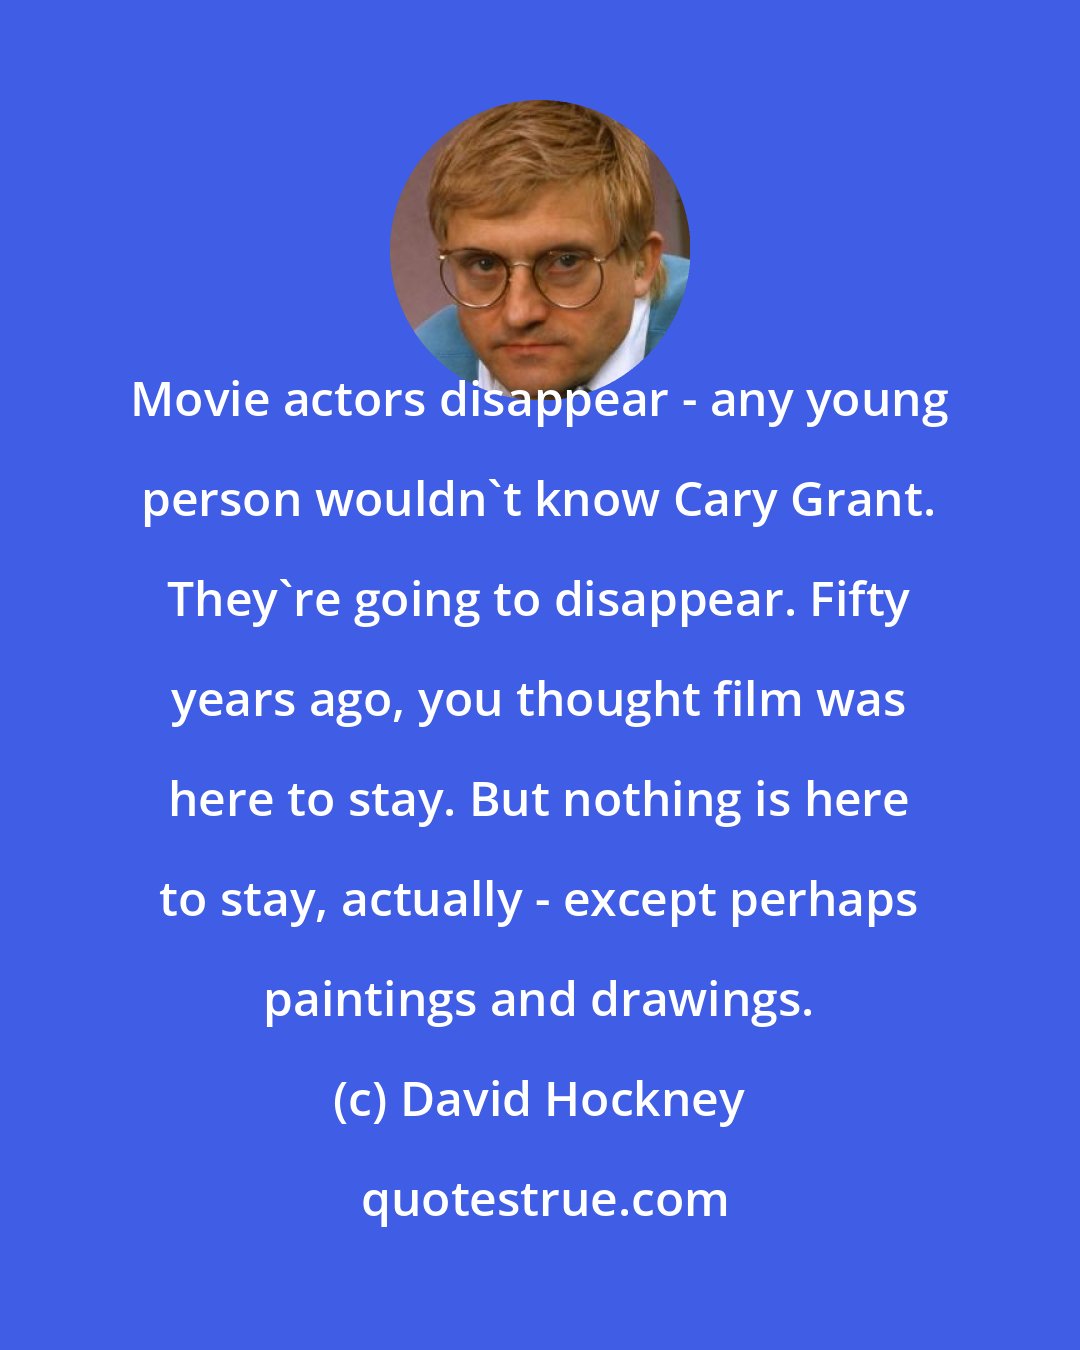 David Hockney: Movie actors disappear - any young person wouldn't know Cary Grant. They're going to disappear. Fifty years ago, you thought film was here to stay. But nothing is here to stay, actually - except perhaps paintings and drawings.